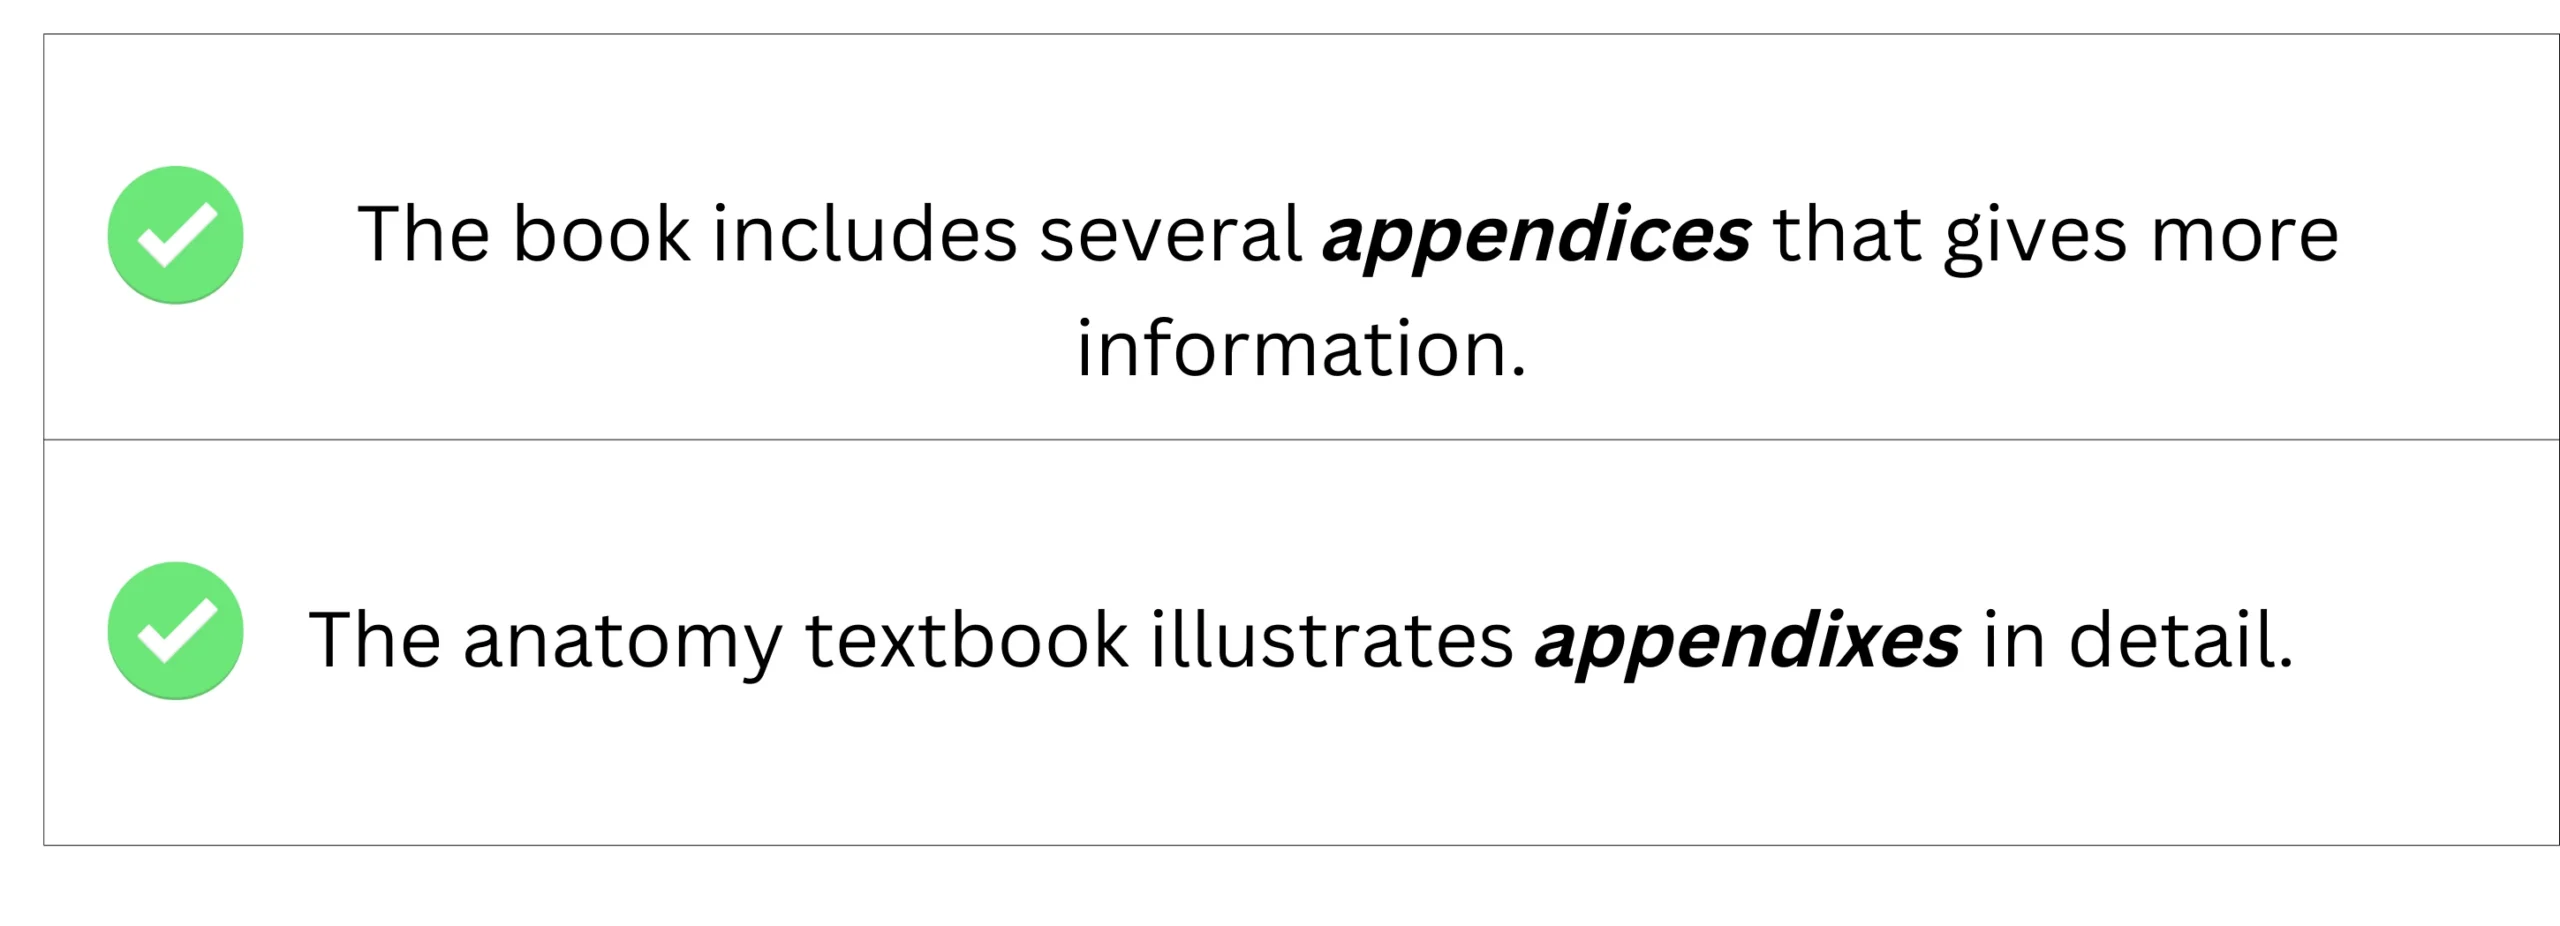 Appendices/appendixes in sentence examples.